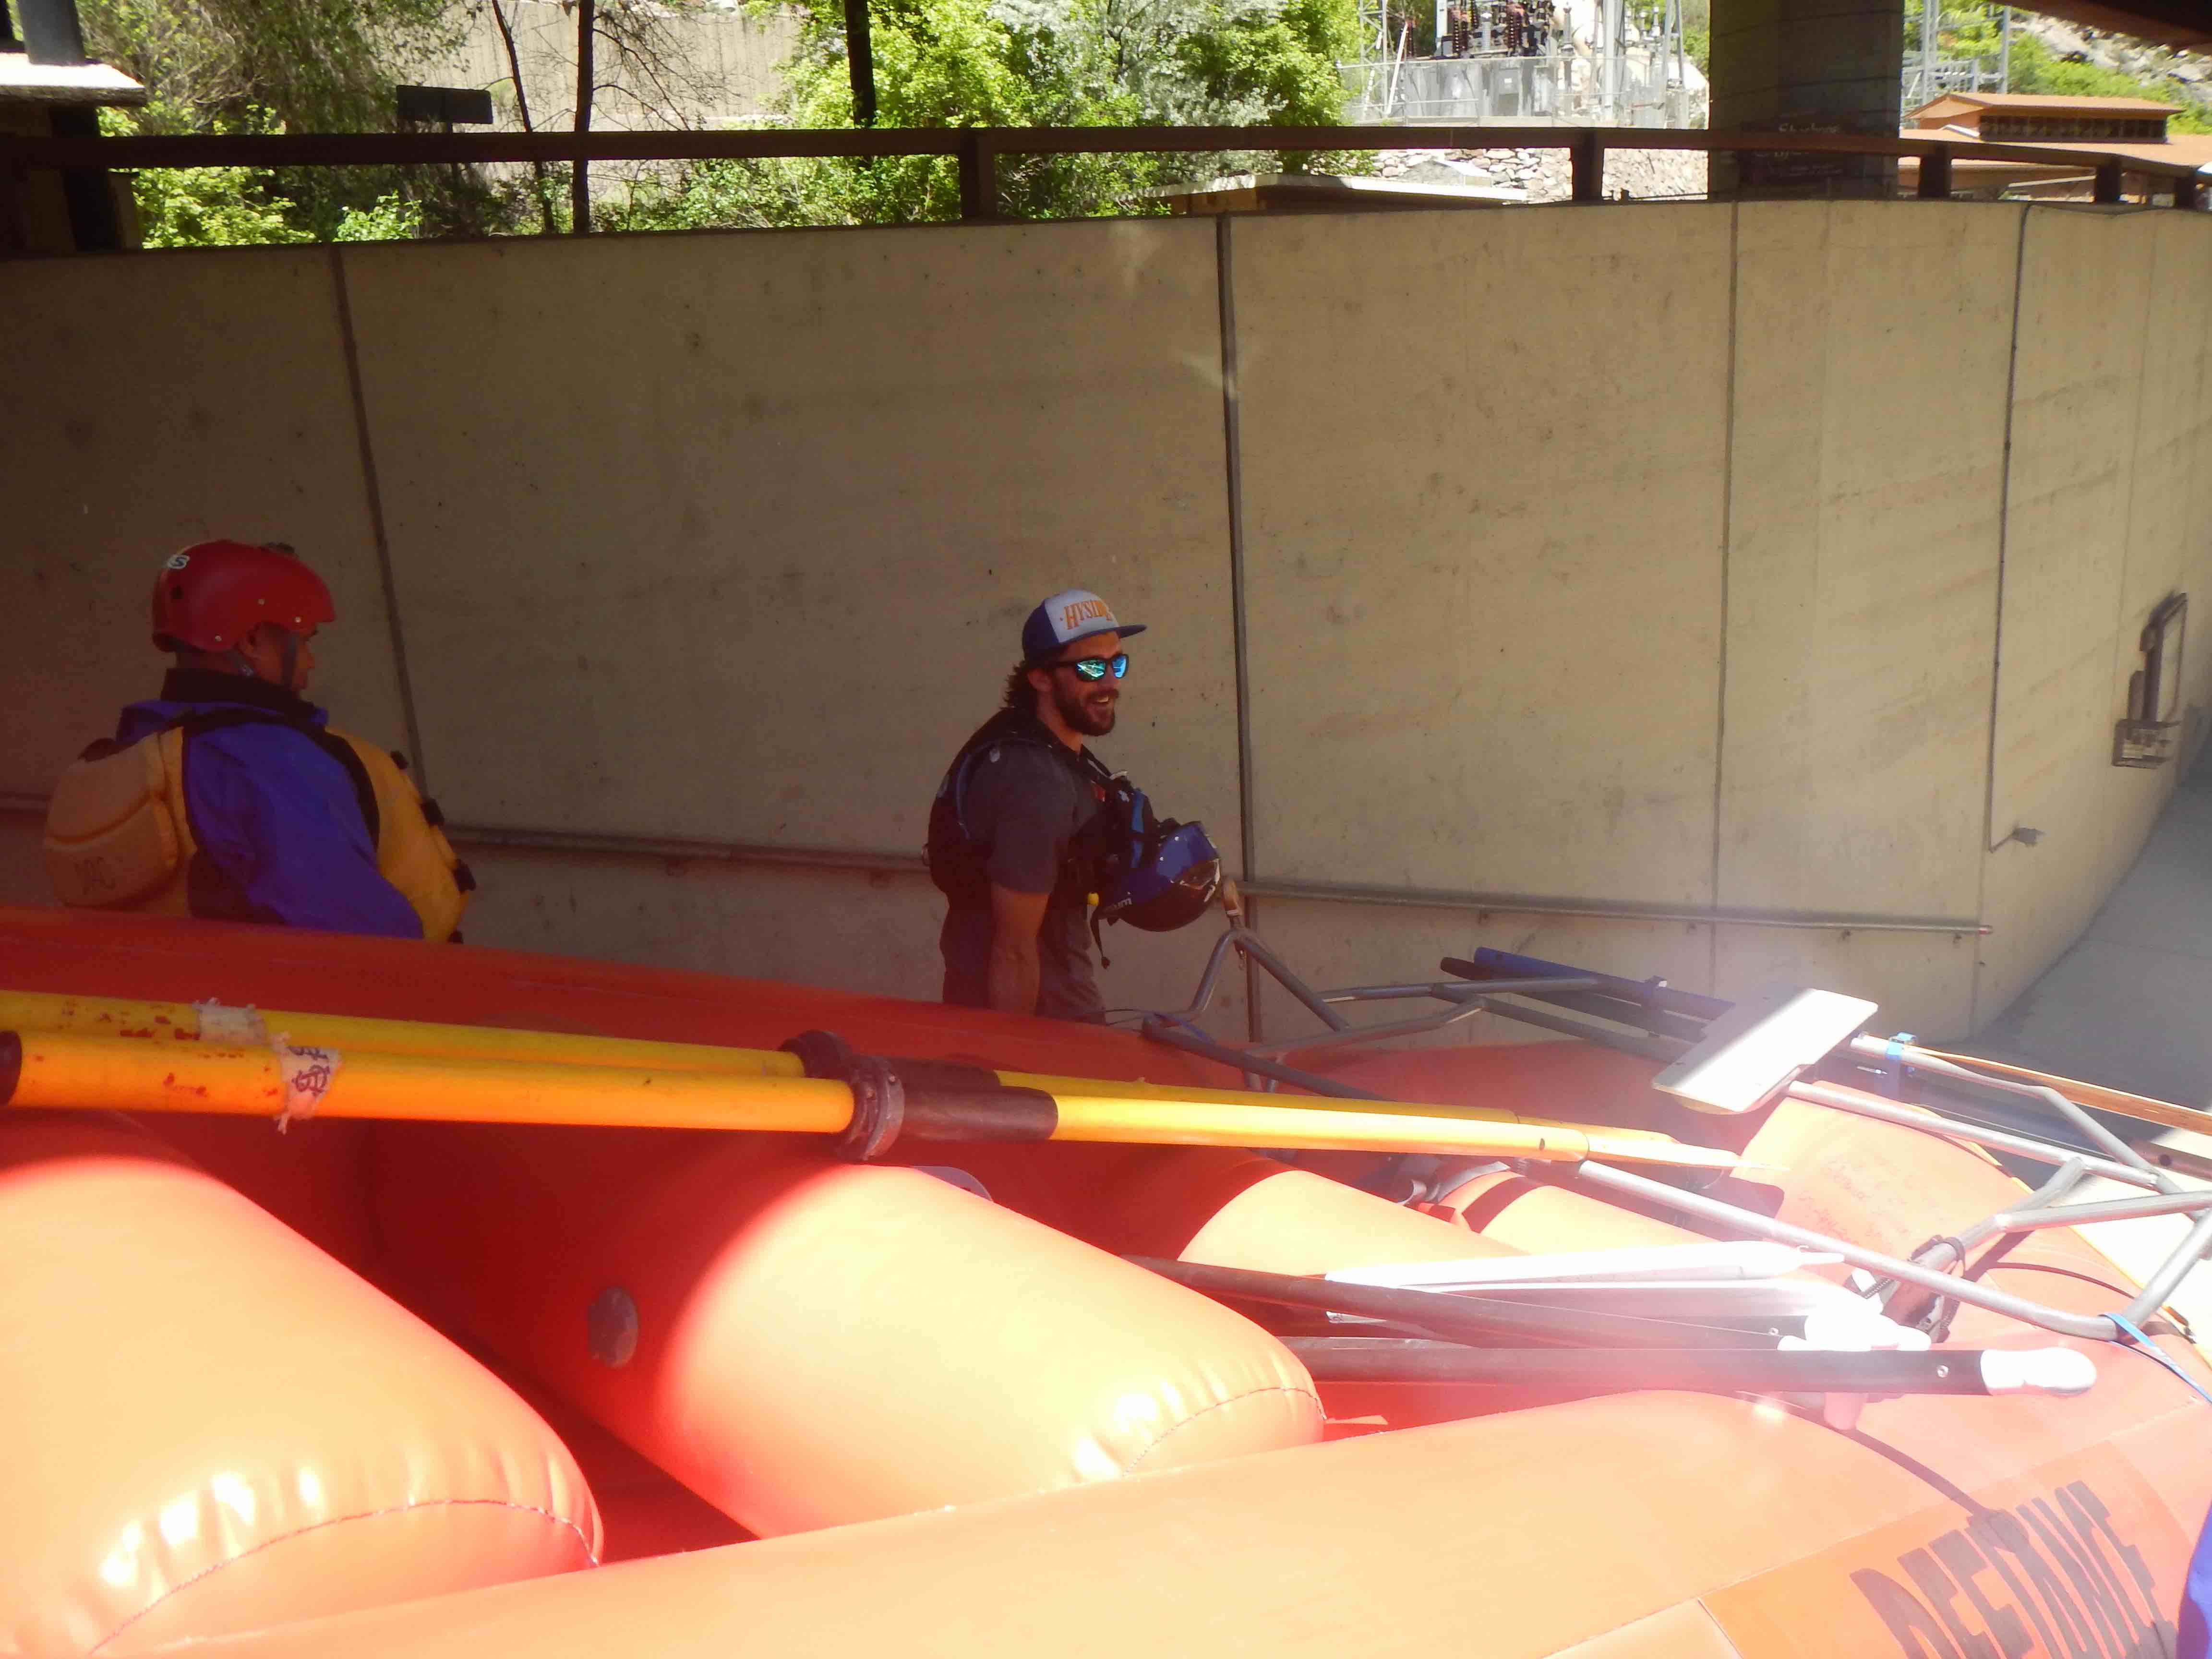 Glenwood Canyon Rafting trip., Carrying the inflatable whitewater boat to the putin location